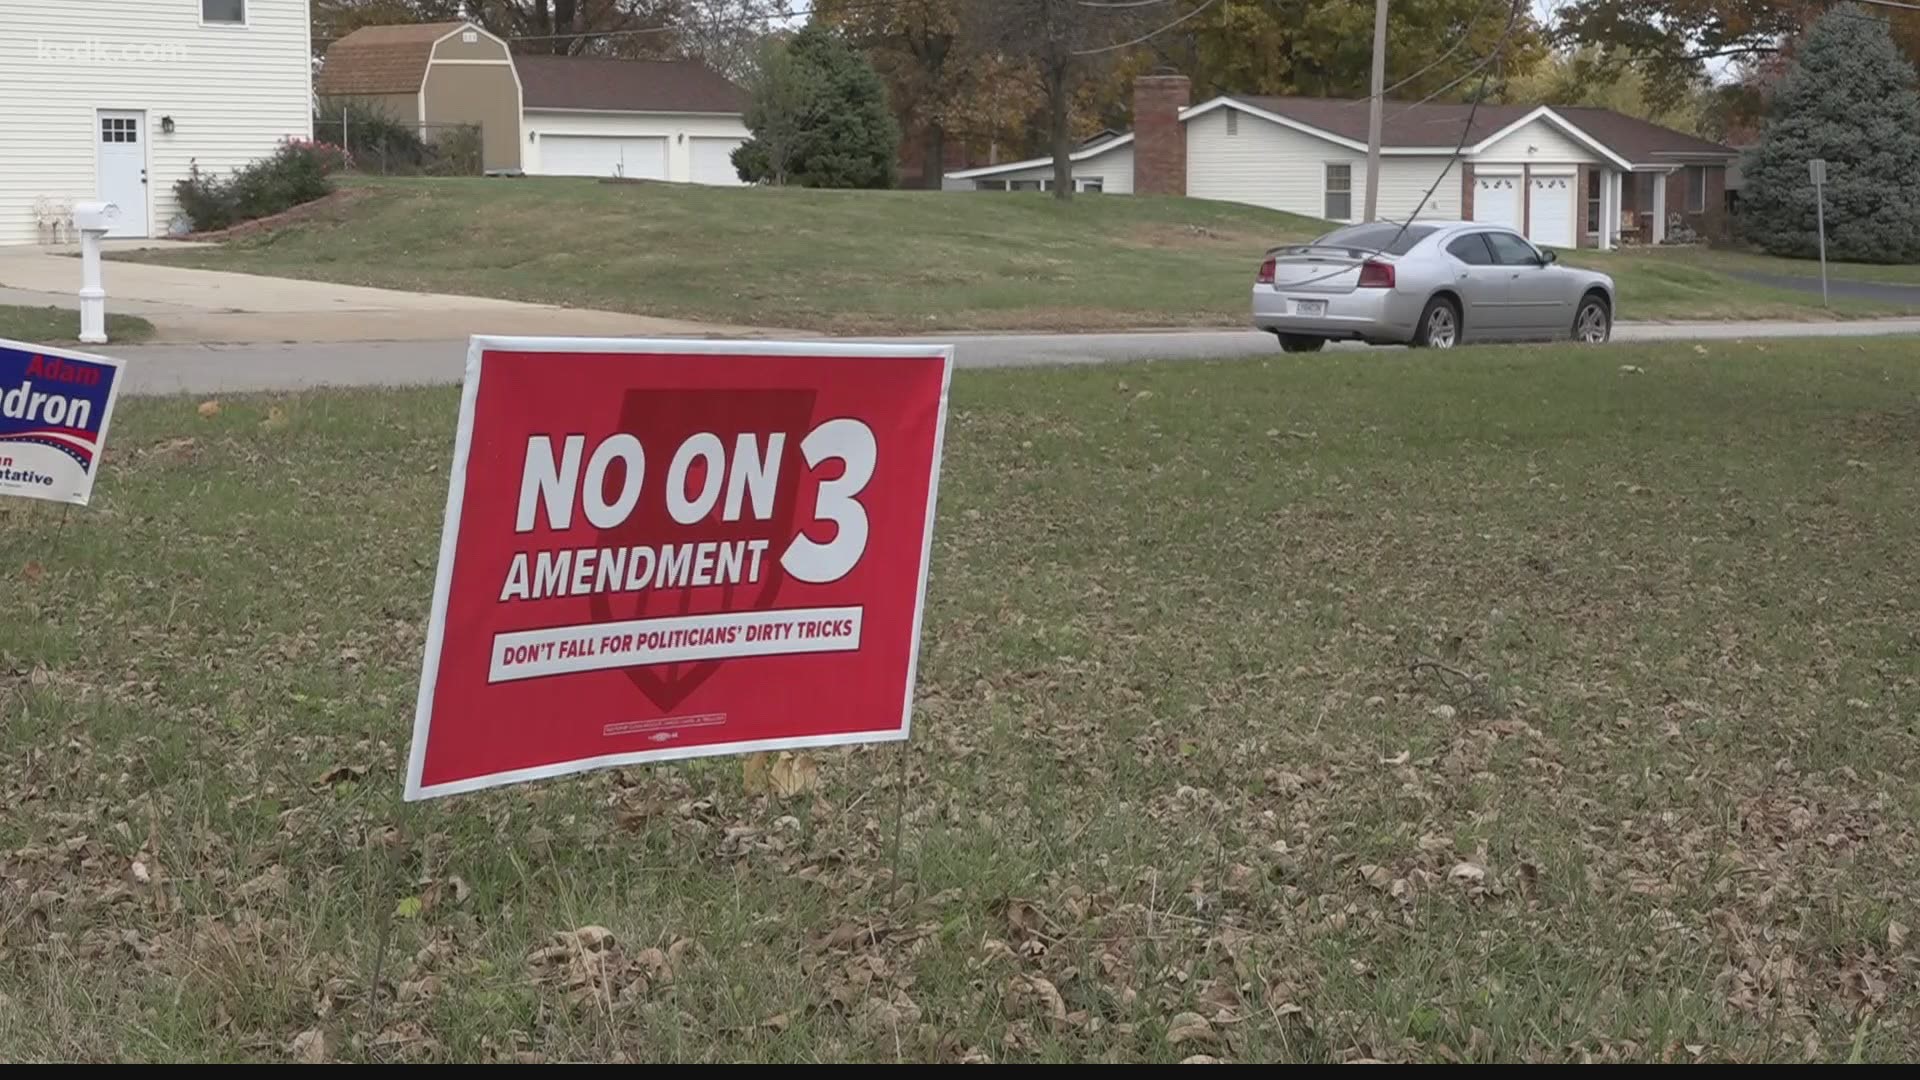 Missouri voters repealed and replaced the Clean Missouri Amendment with Amendment 3